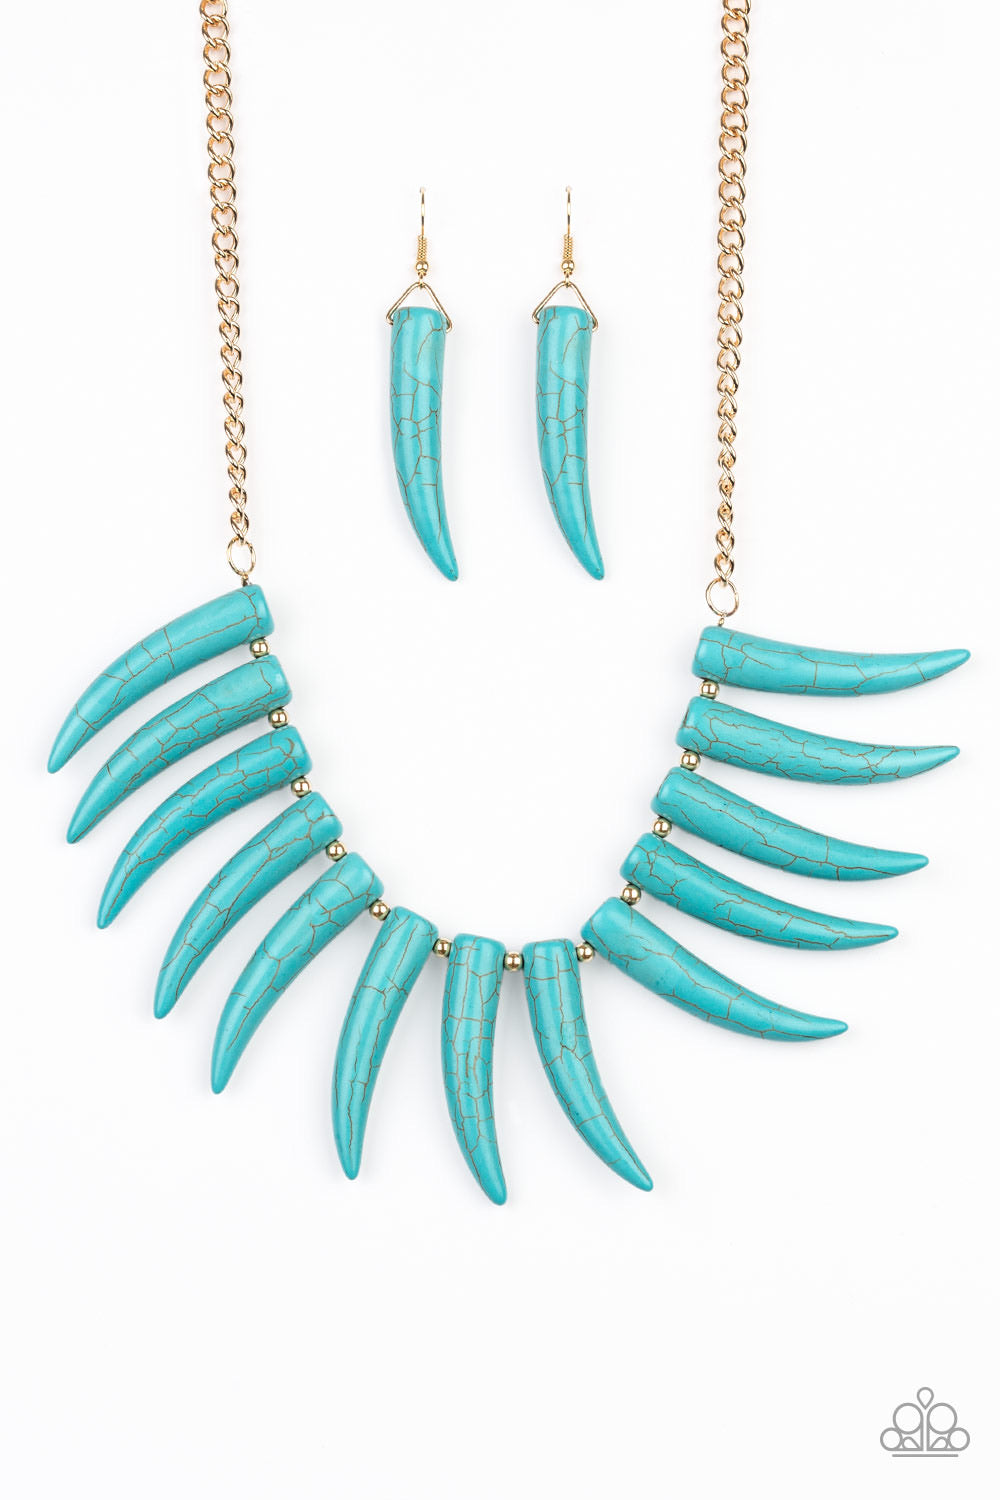 Paparazzi Necklace -  Tusk Tundra - Blue (Life Of The Party August 2020)